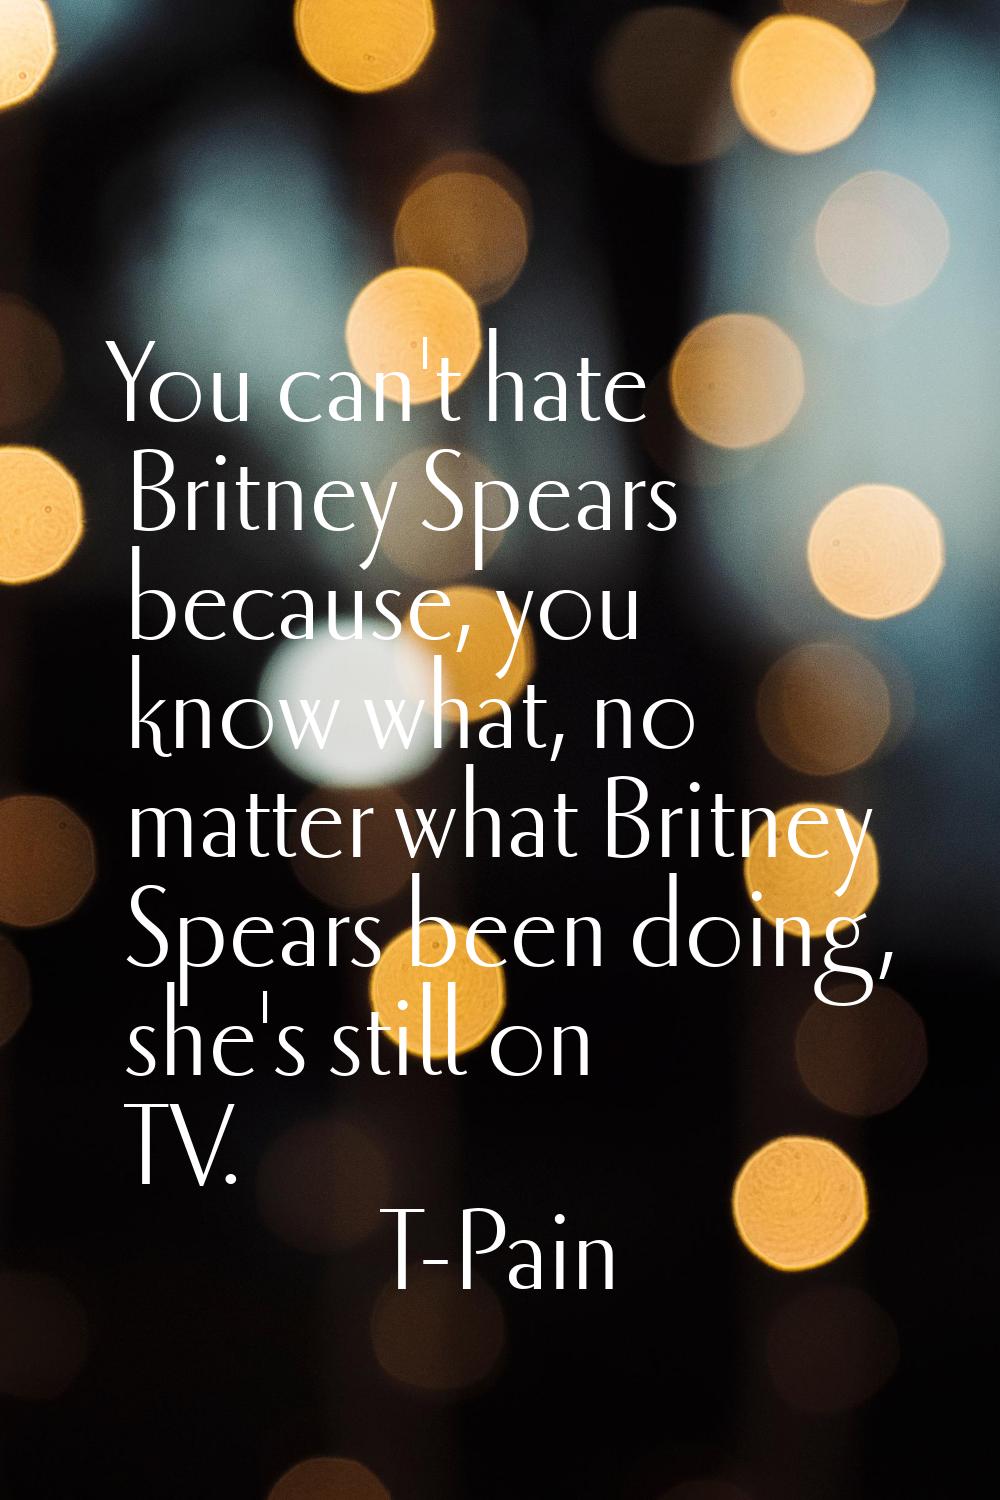 You can't hate Britney Spears because, you know what, no matter what Britney Spears been doing, she